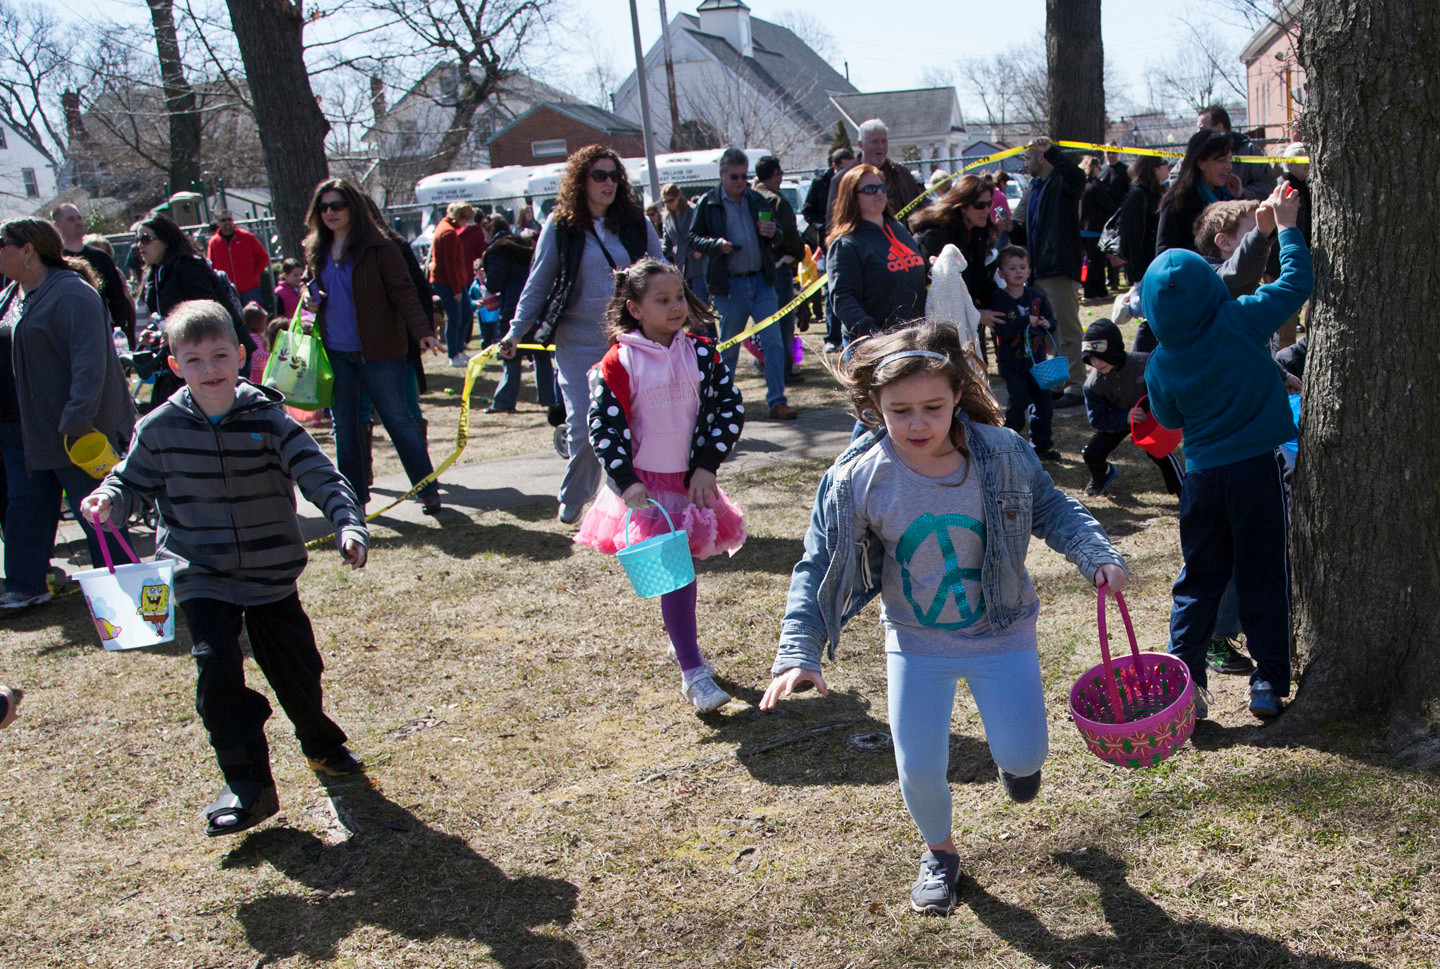 And they’re off! Children raced to pick up the colorful, scattered eggs.